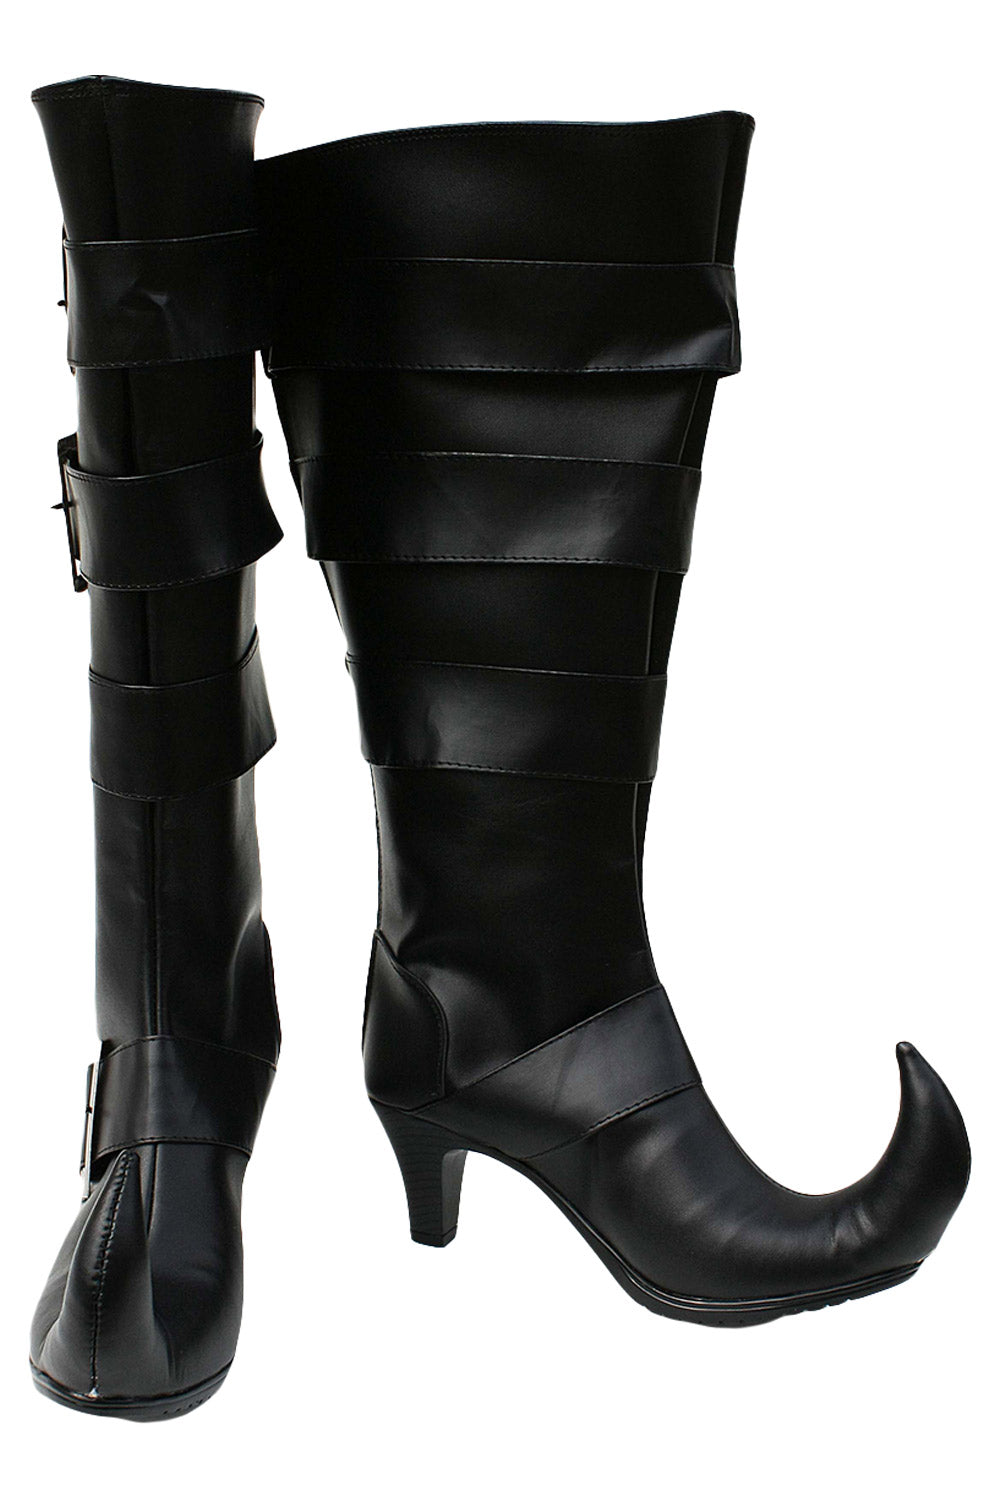 Black Butler Under Taker Cosplay Shoes Boots